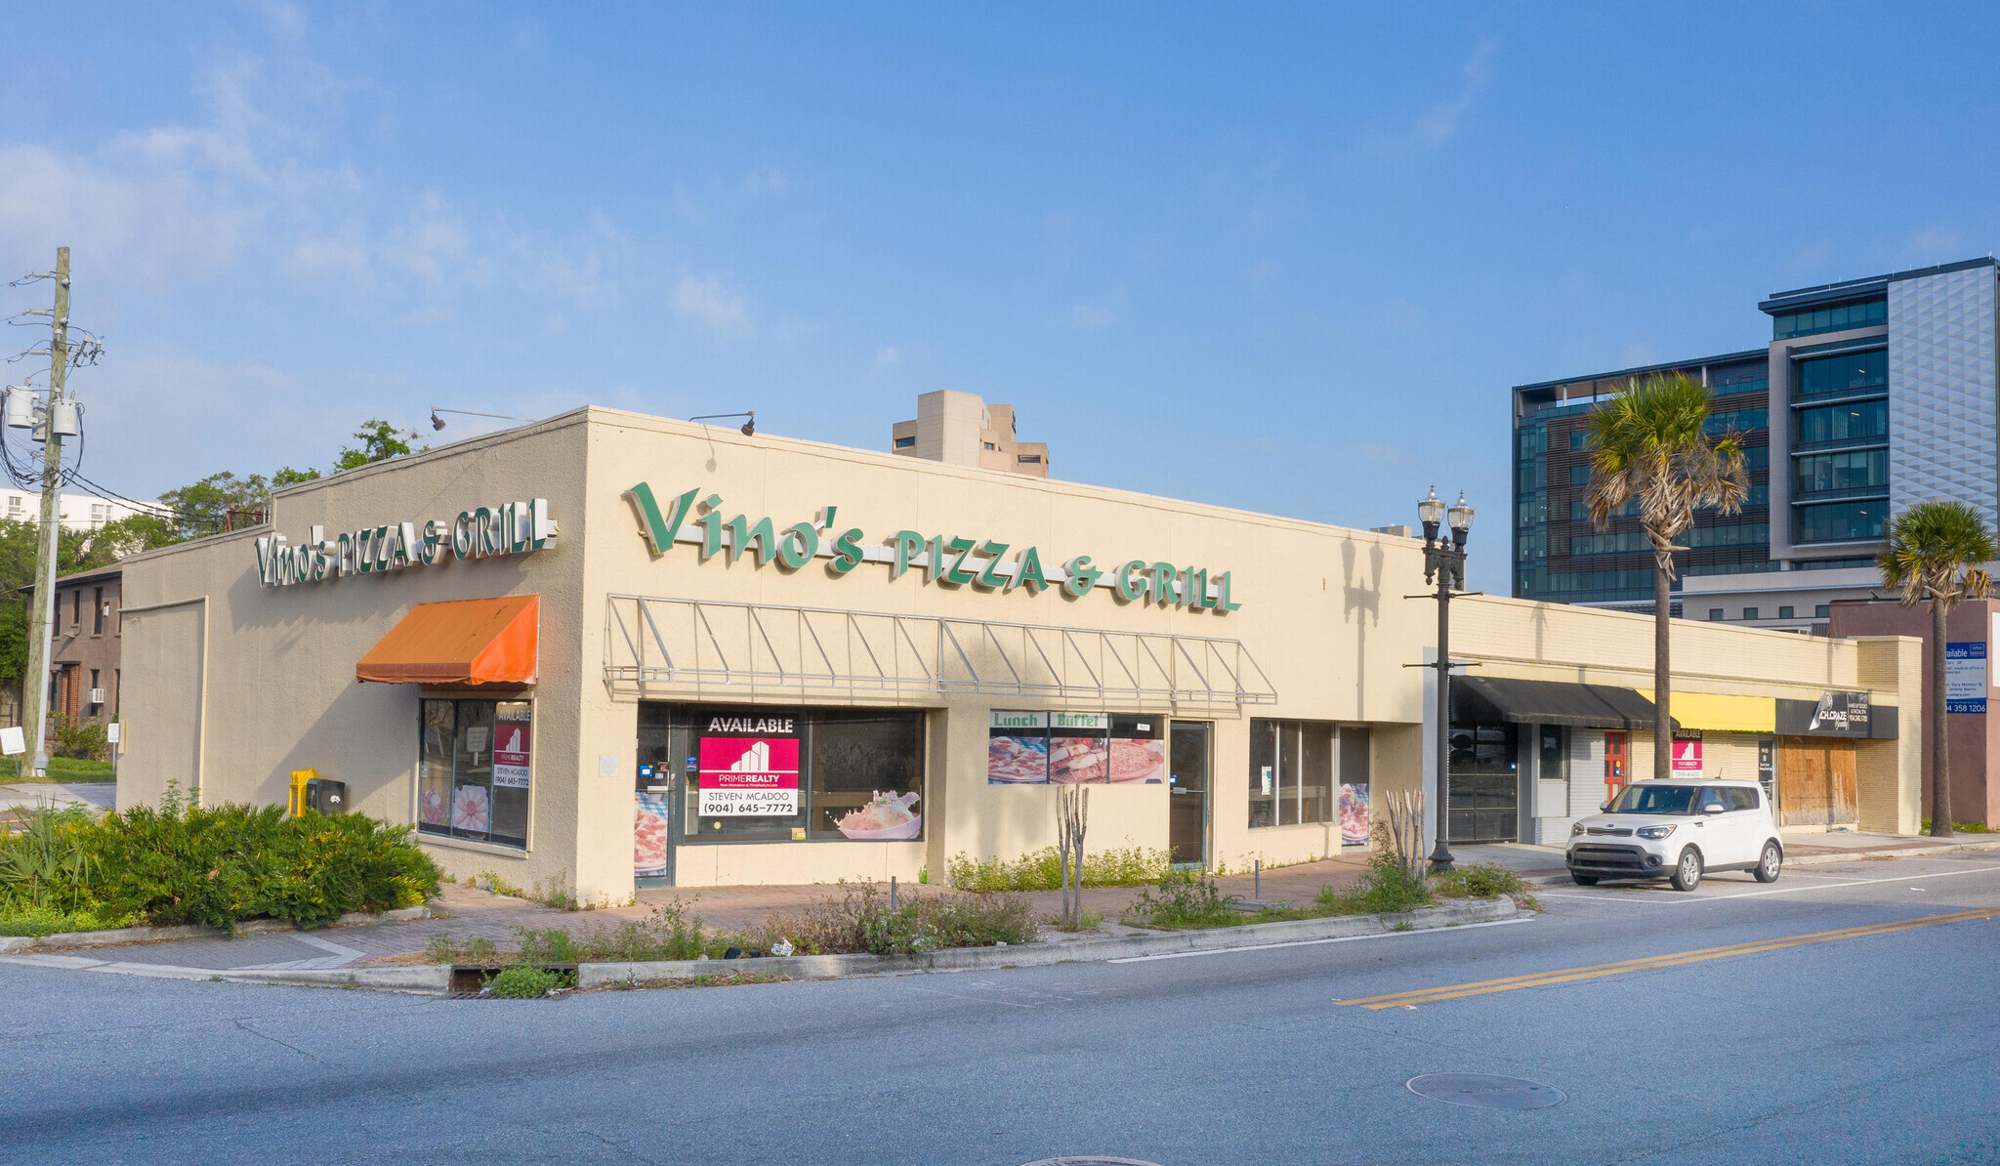 Pink Salt is taking the former Vino’s Pizza & Grill restaurants pace 1430 San Marco Blvd.